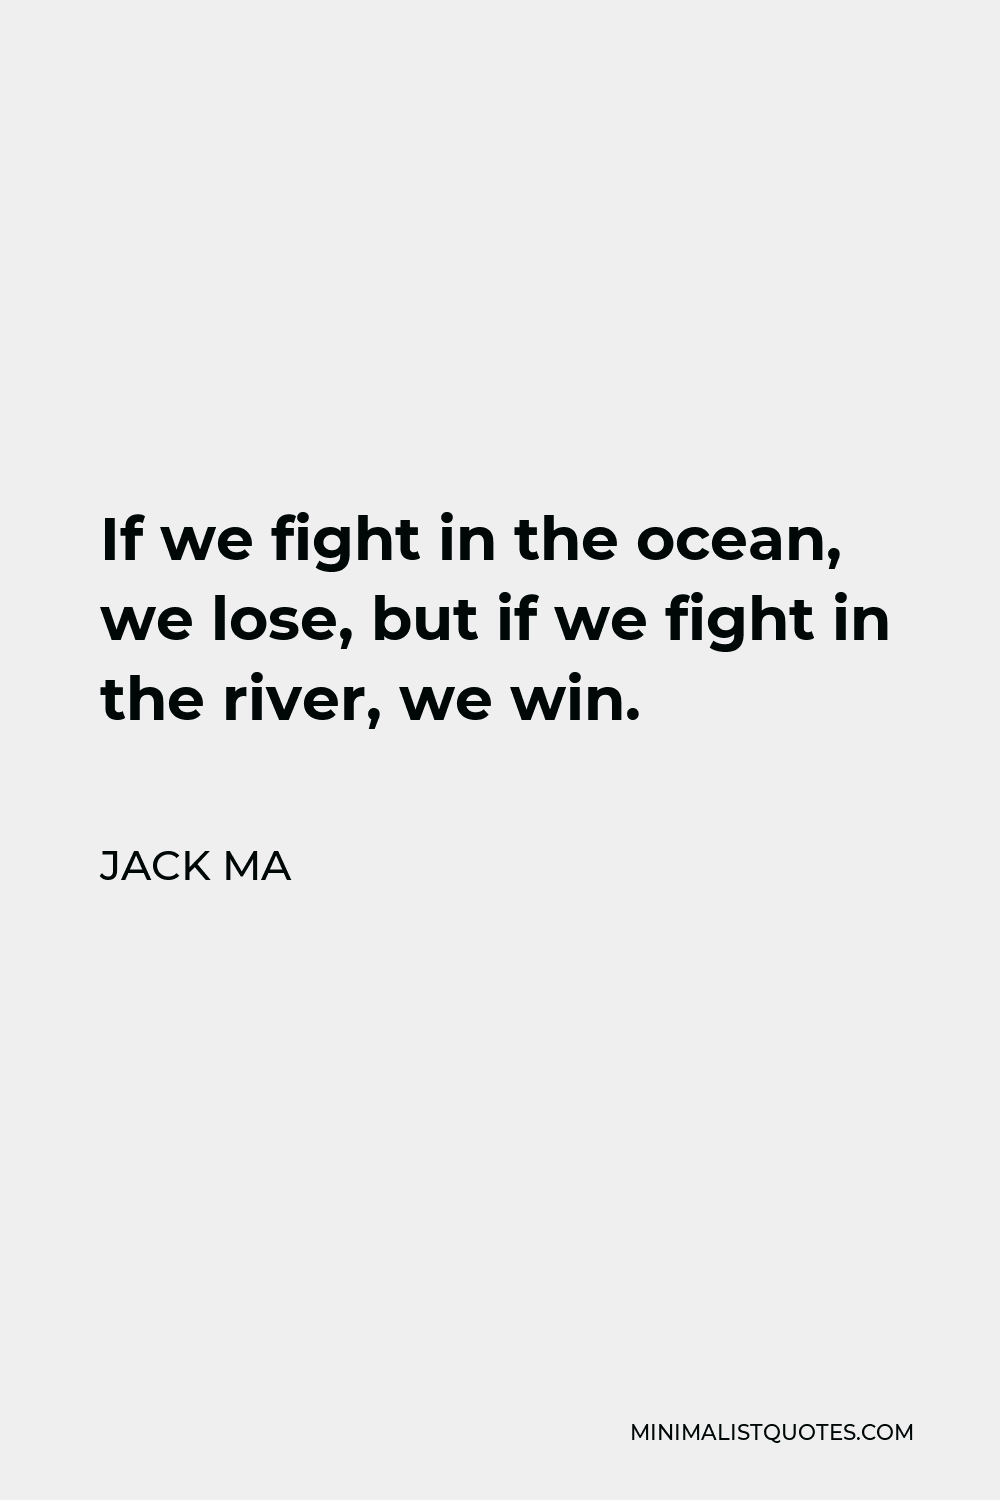 Jack Ma Quote - If we fight in the ocean, we lose, but if we fight in the river, we win.